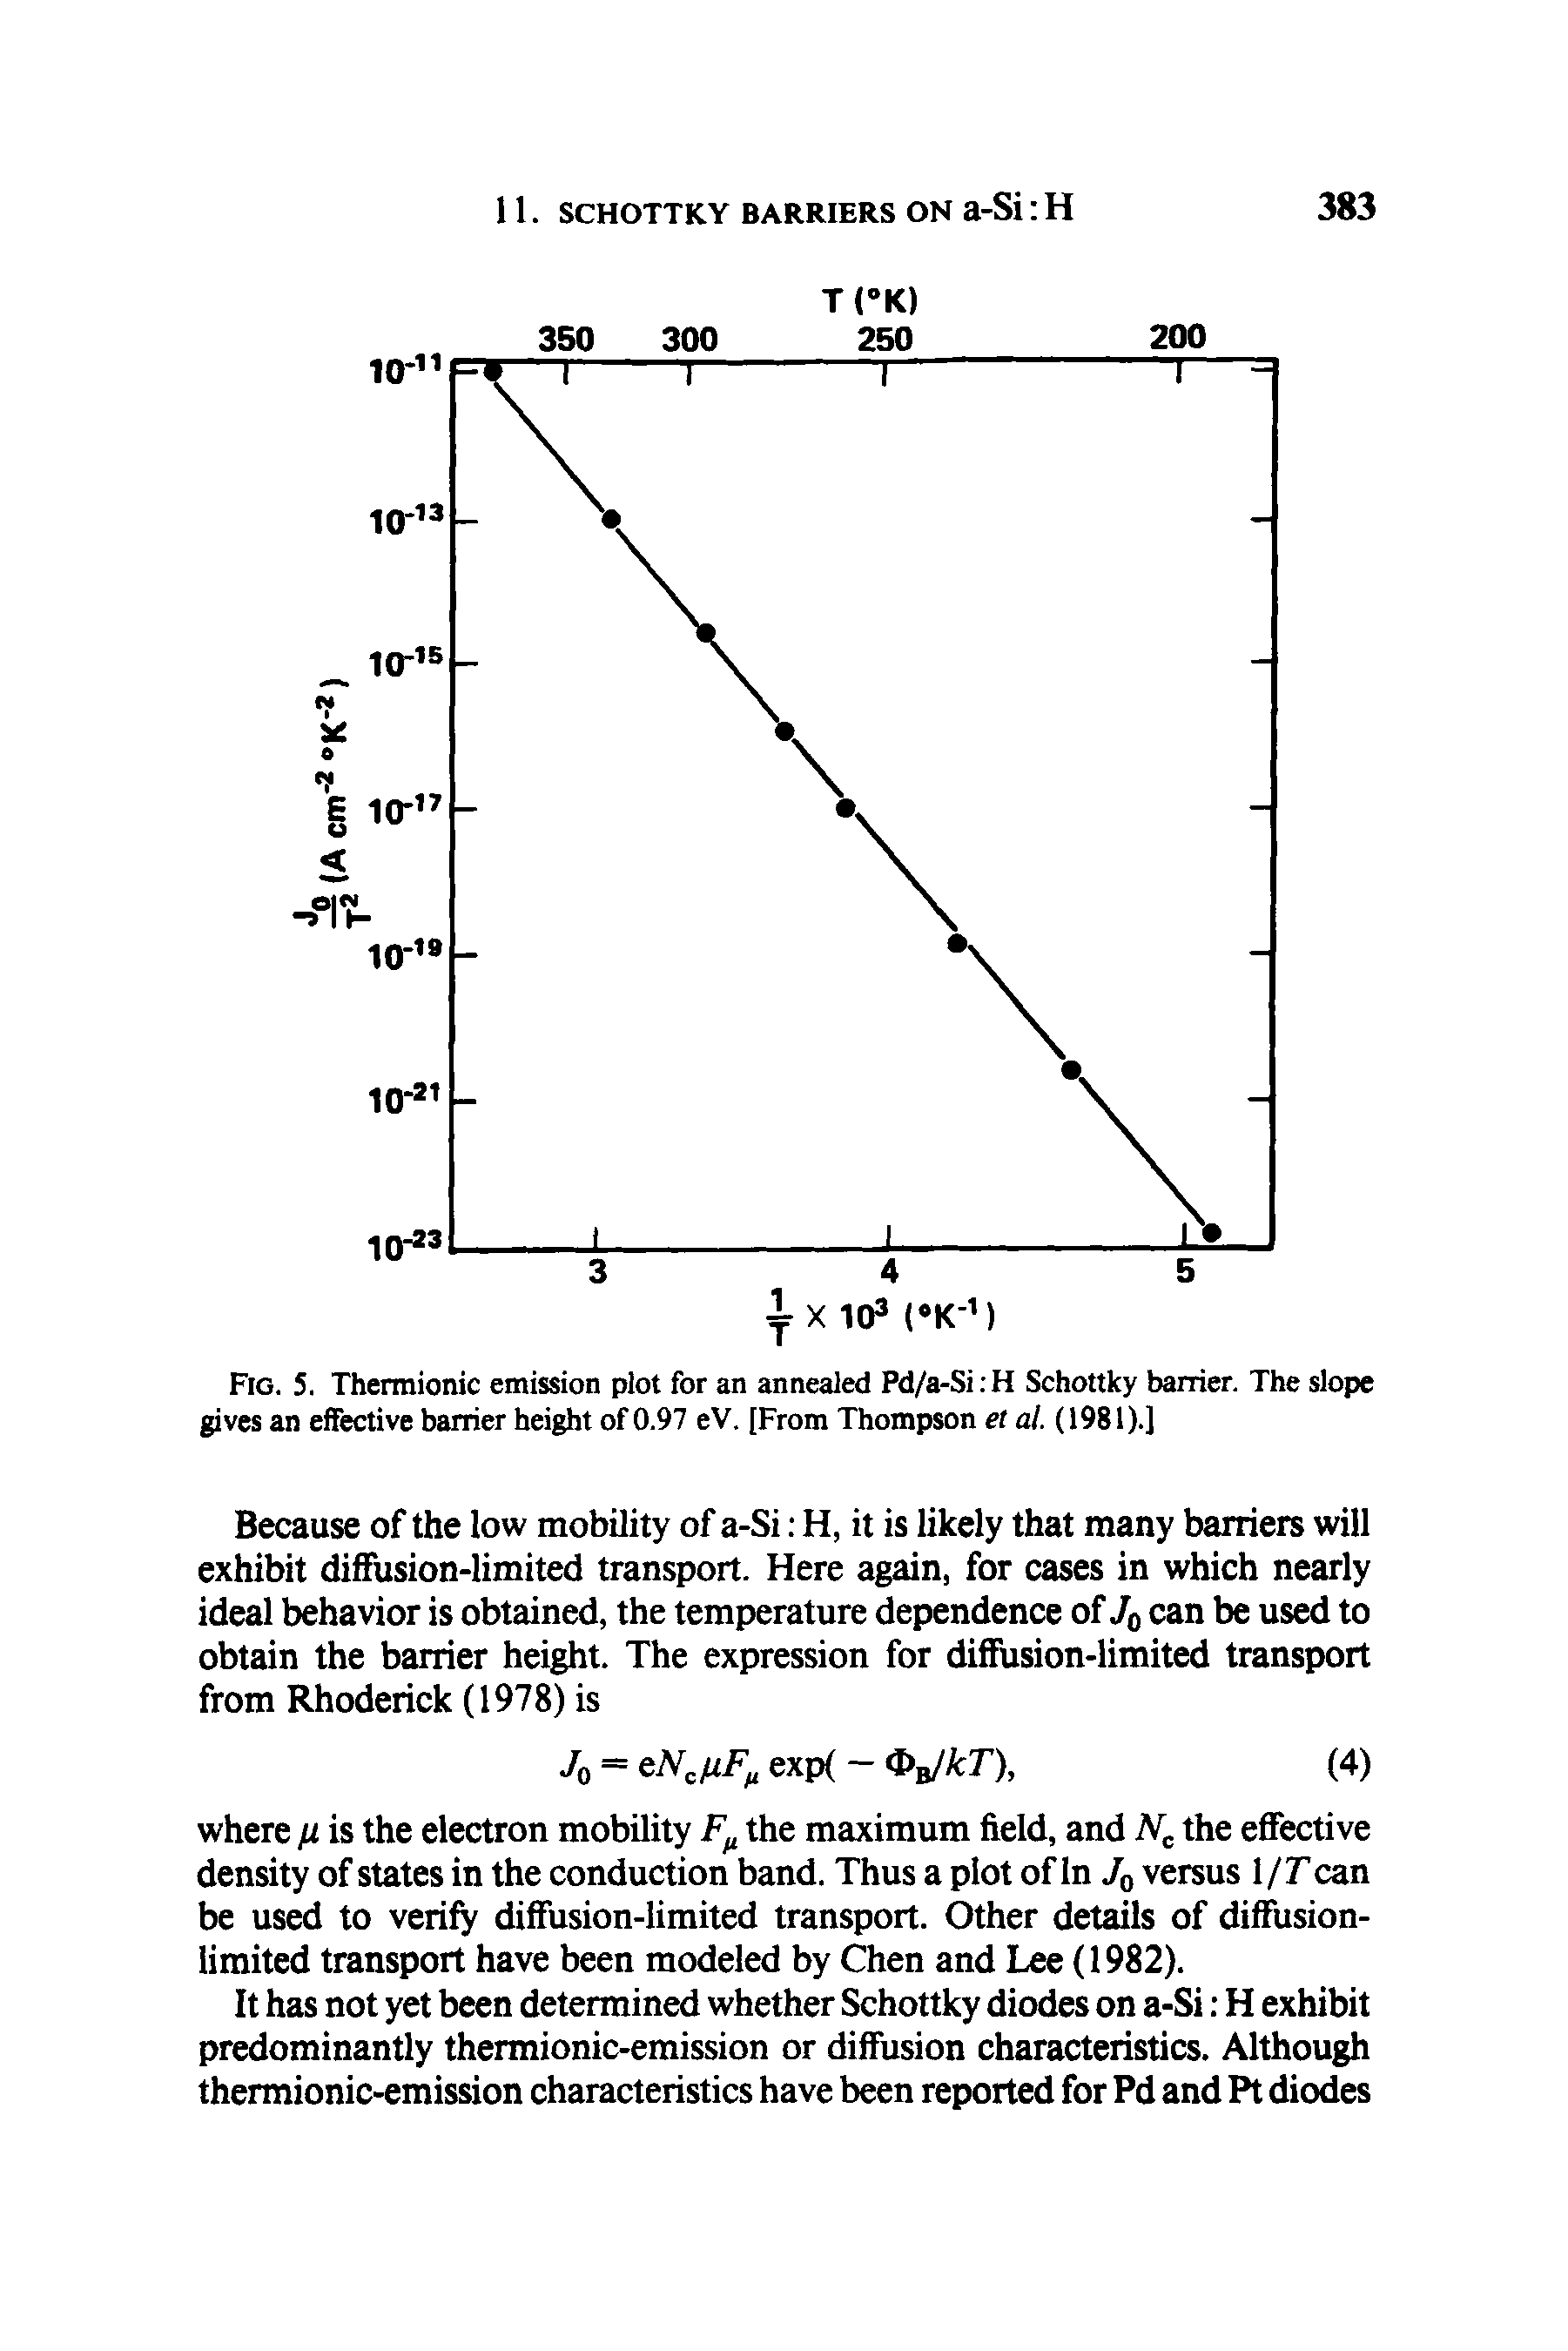 Fig. 5. Thermionic emission plot for an annealed Pd/a-Si H Schottky barrier. The slope gives an effective barrier height of 0.97 eV. [From Thompson et al. (1981).]...